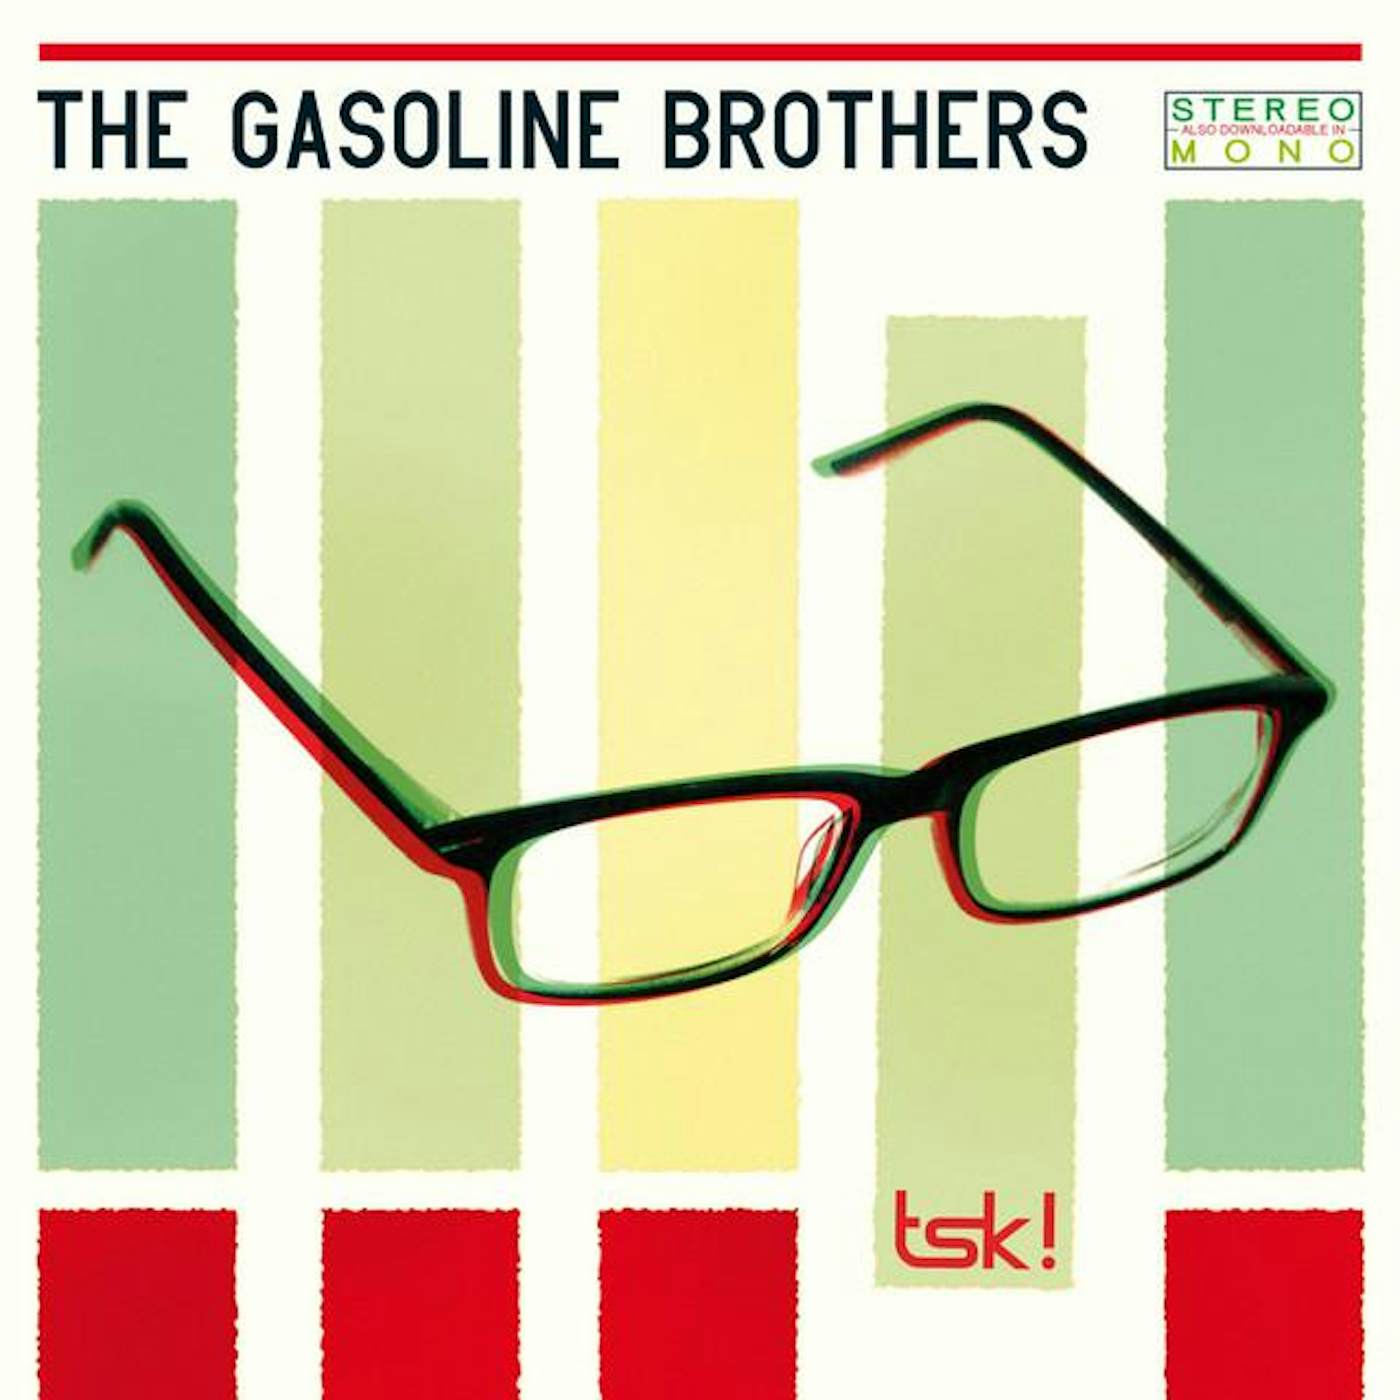 The Gasoline Brothers